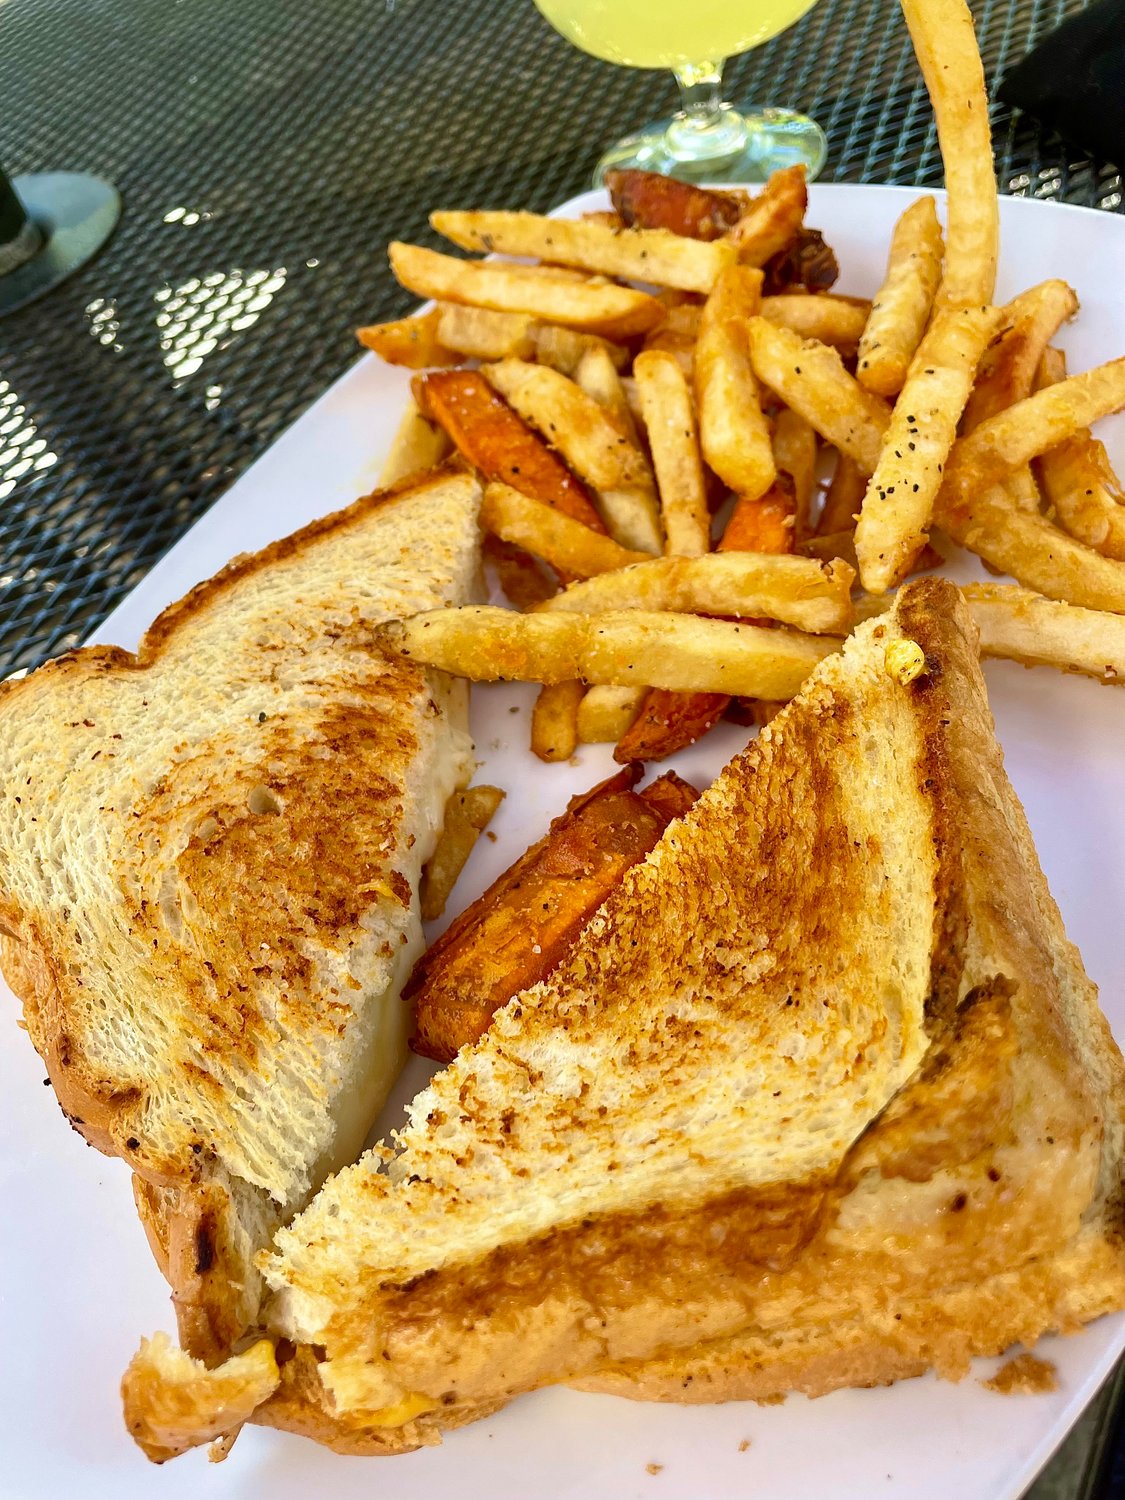 The grilled cheese and carrot cake at Black Cat Bistro are quite the combo